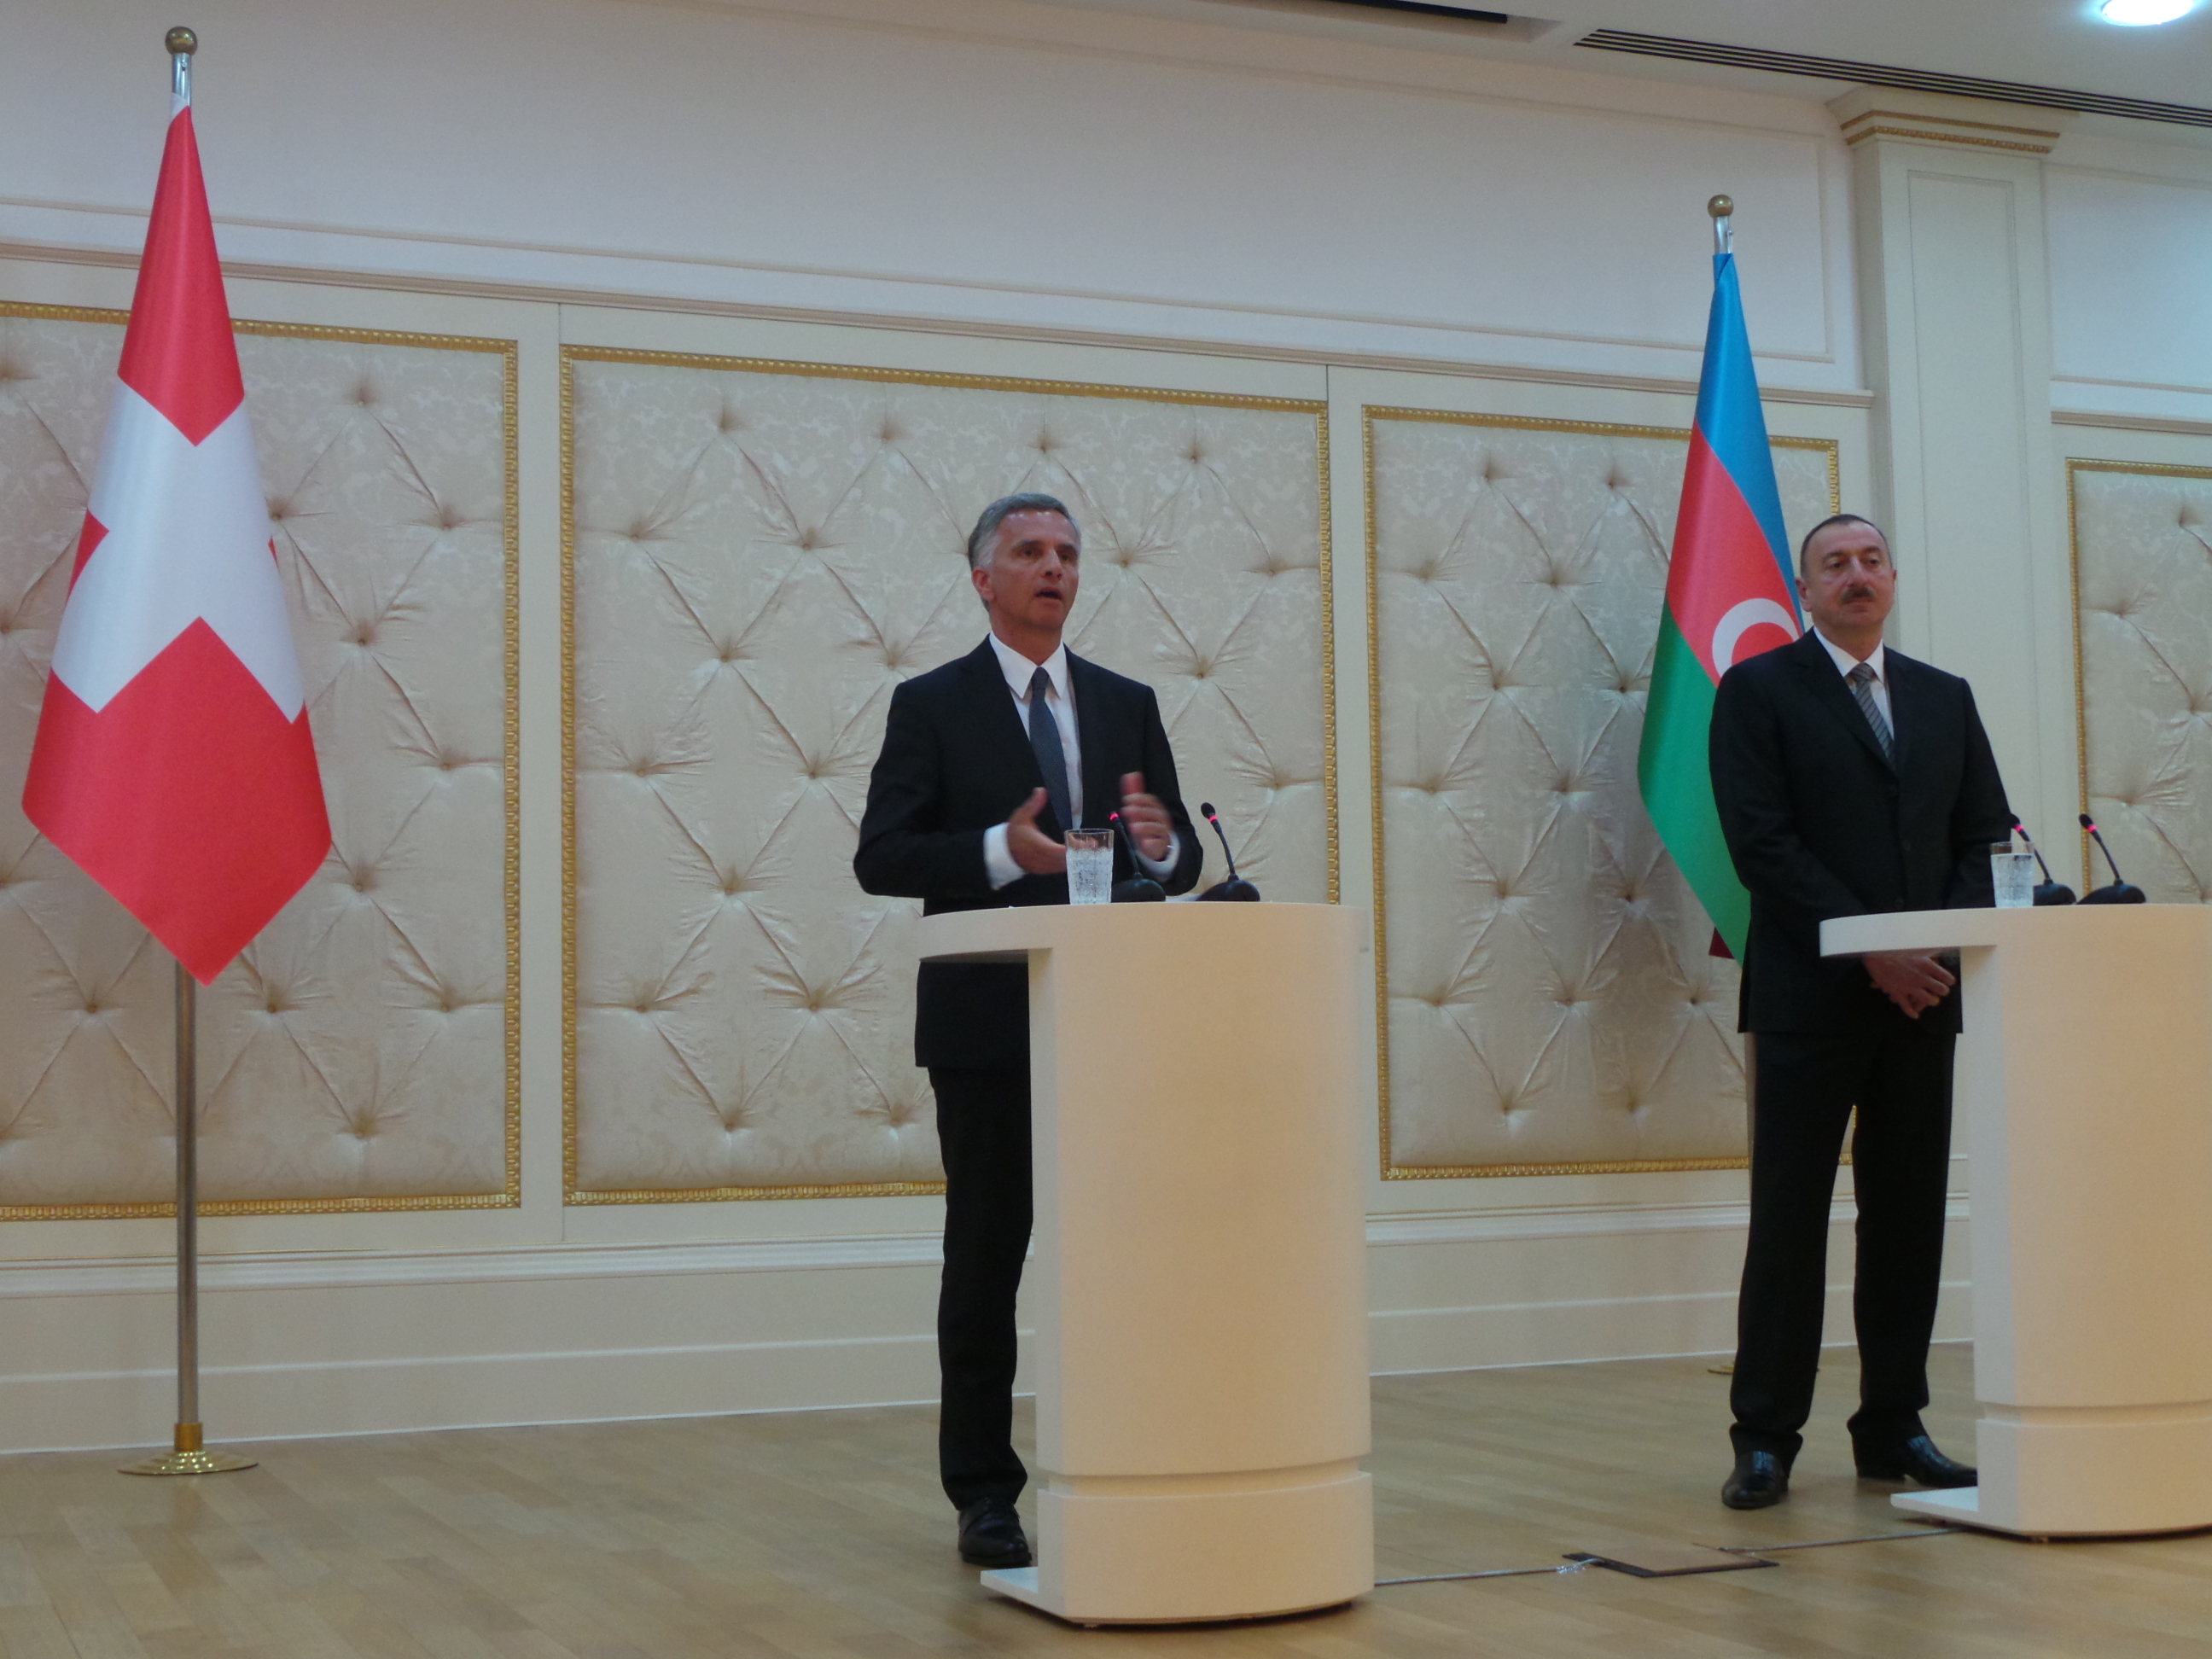 President Didier Burkhalter and President Ilham Aliyev answer to the media’s questions.